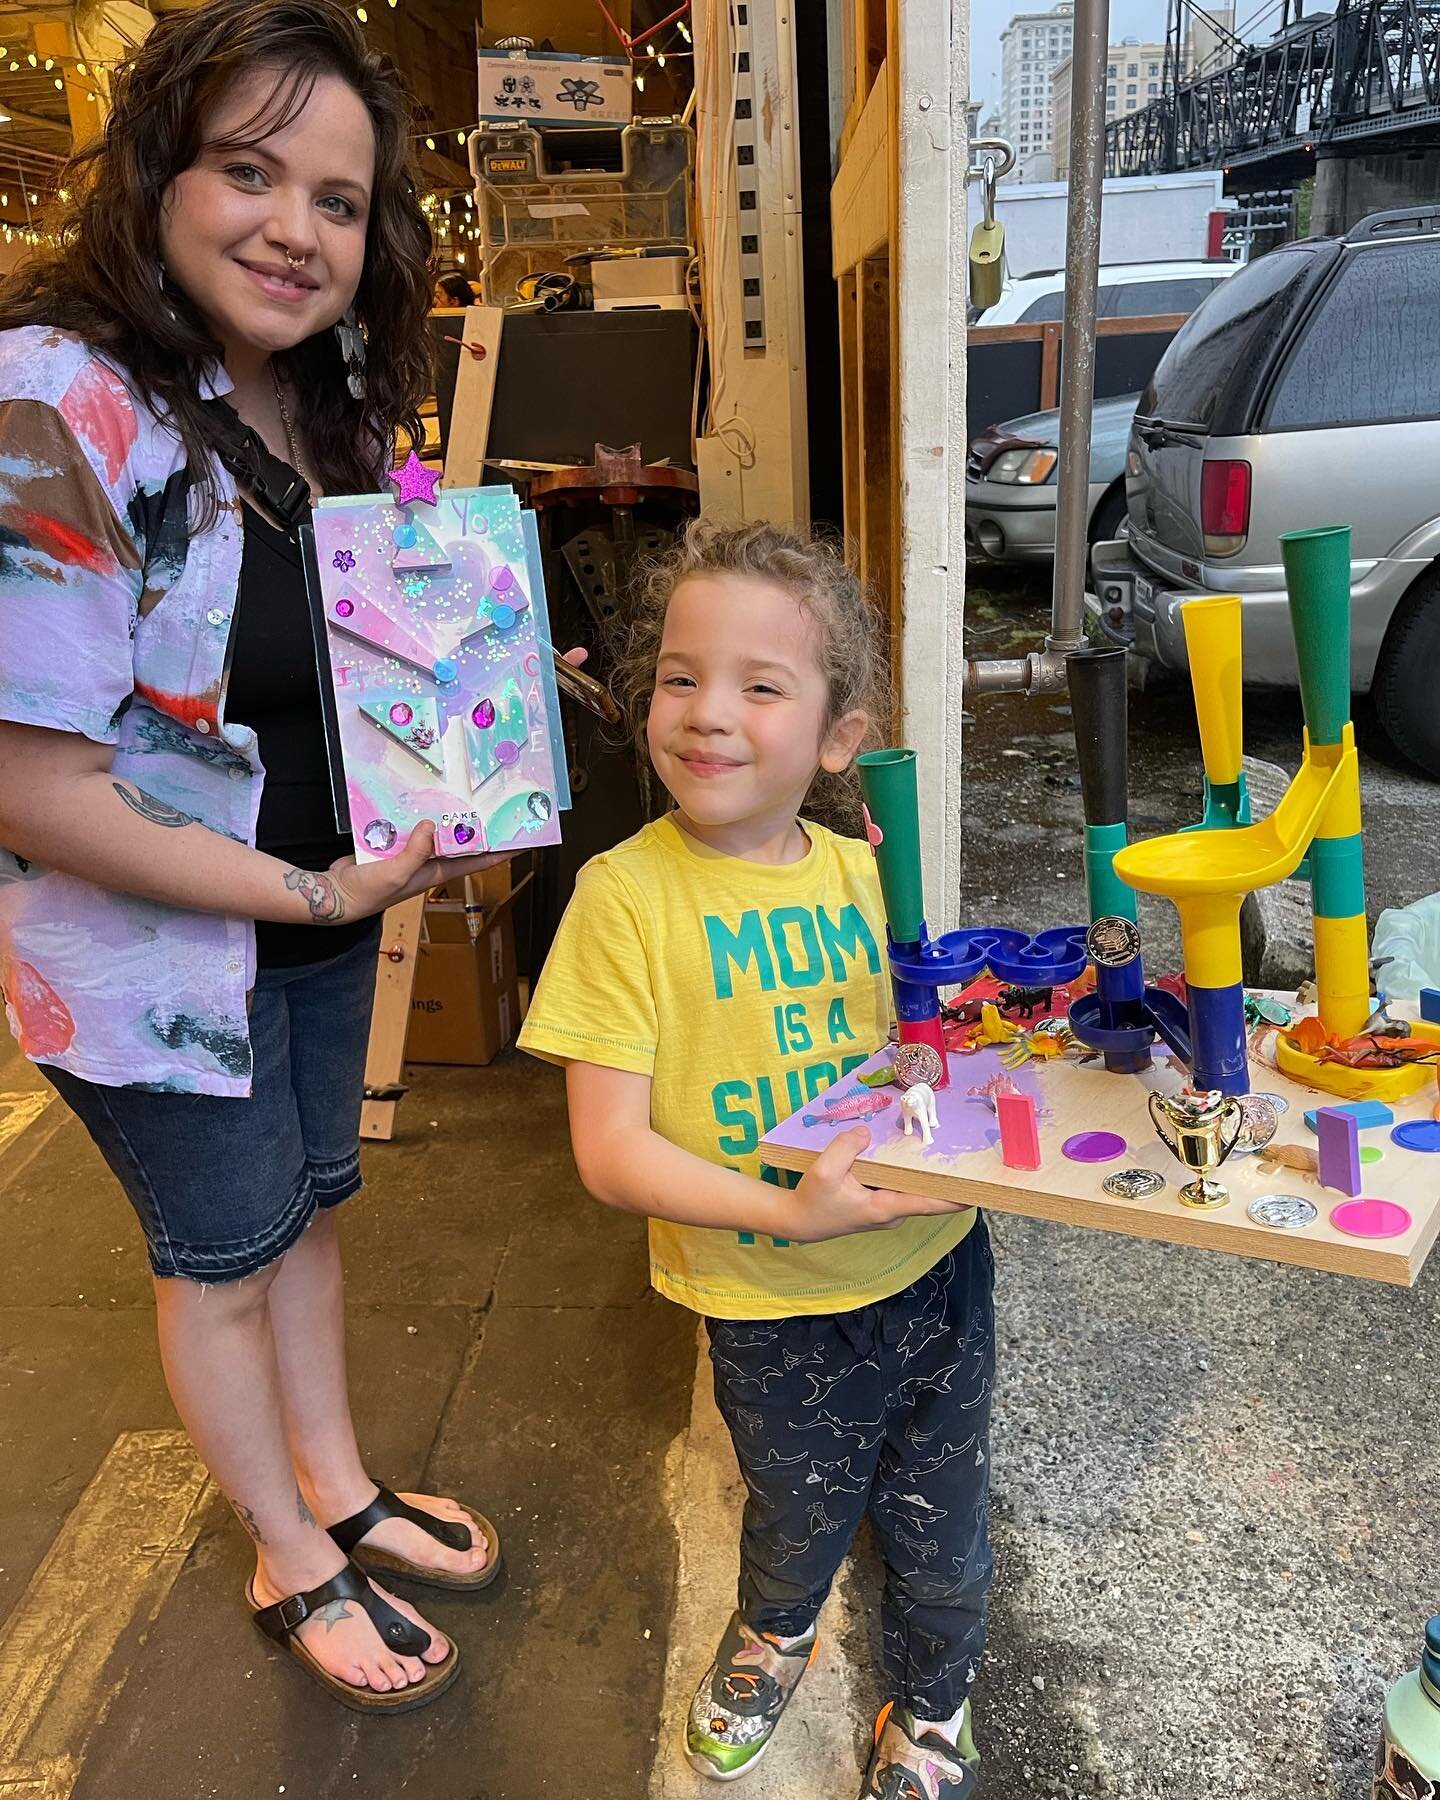 Karoake, snacks, craft activity and a Tacoma cityscape mini putt course for the win! 

Craftaroake!!

While folks sang their hearts out with Luis @lui5_gc , we played on @olivia_phaze custom Rube Goldberg mini putt and build our own mini sized marble